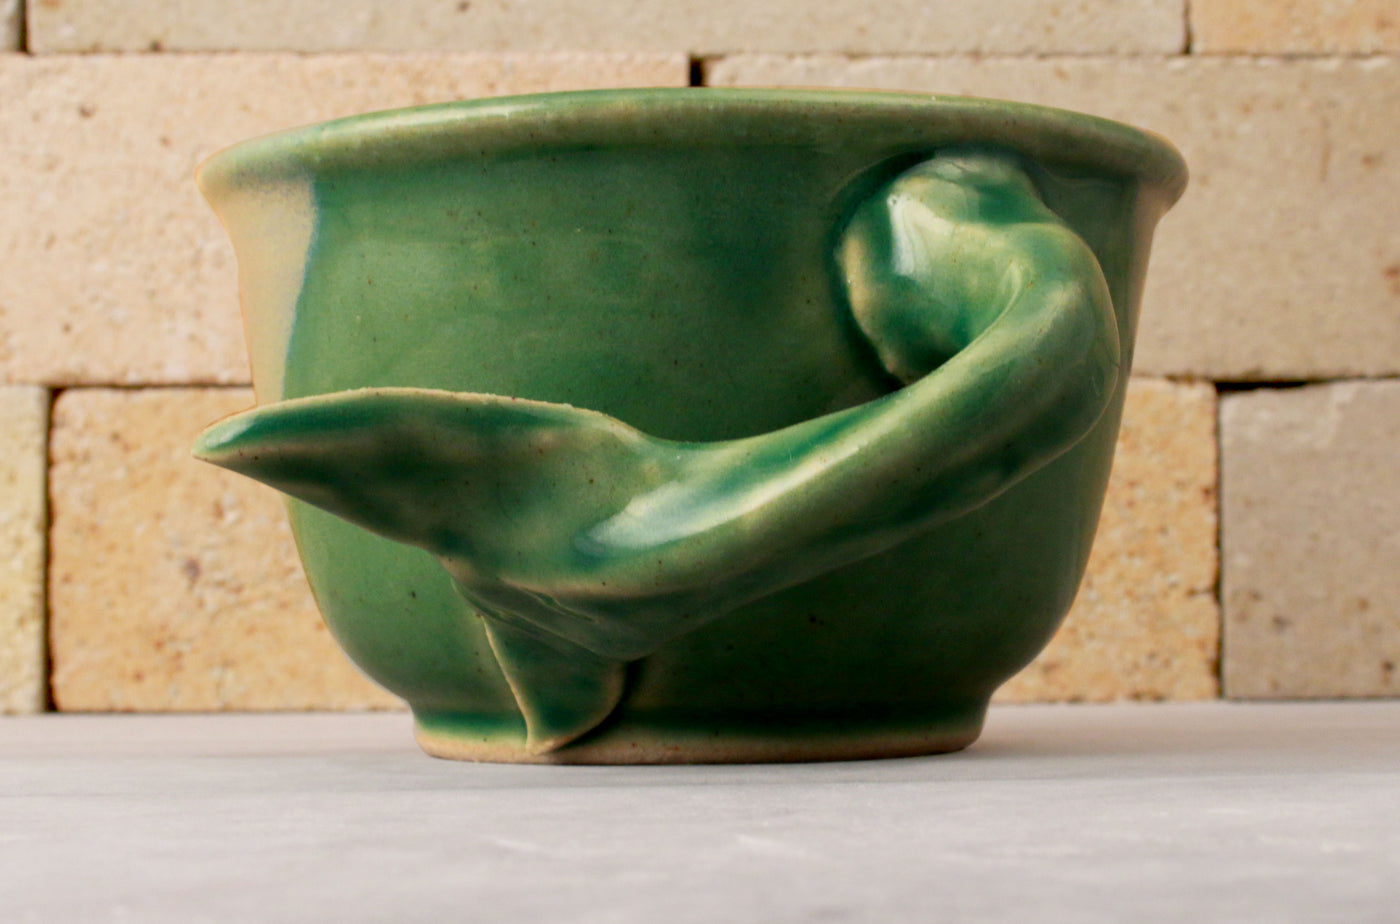 Shave Mug - the "Whale Tail" - Sea Green and Yellow